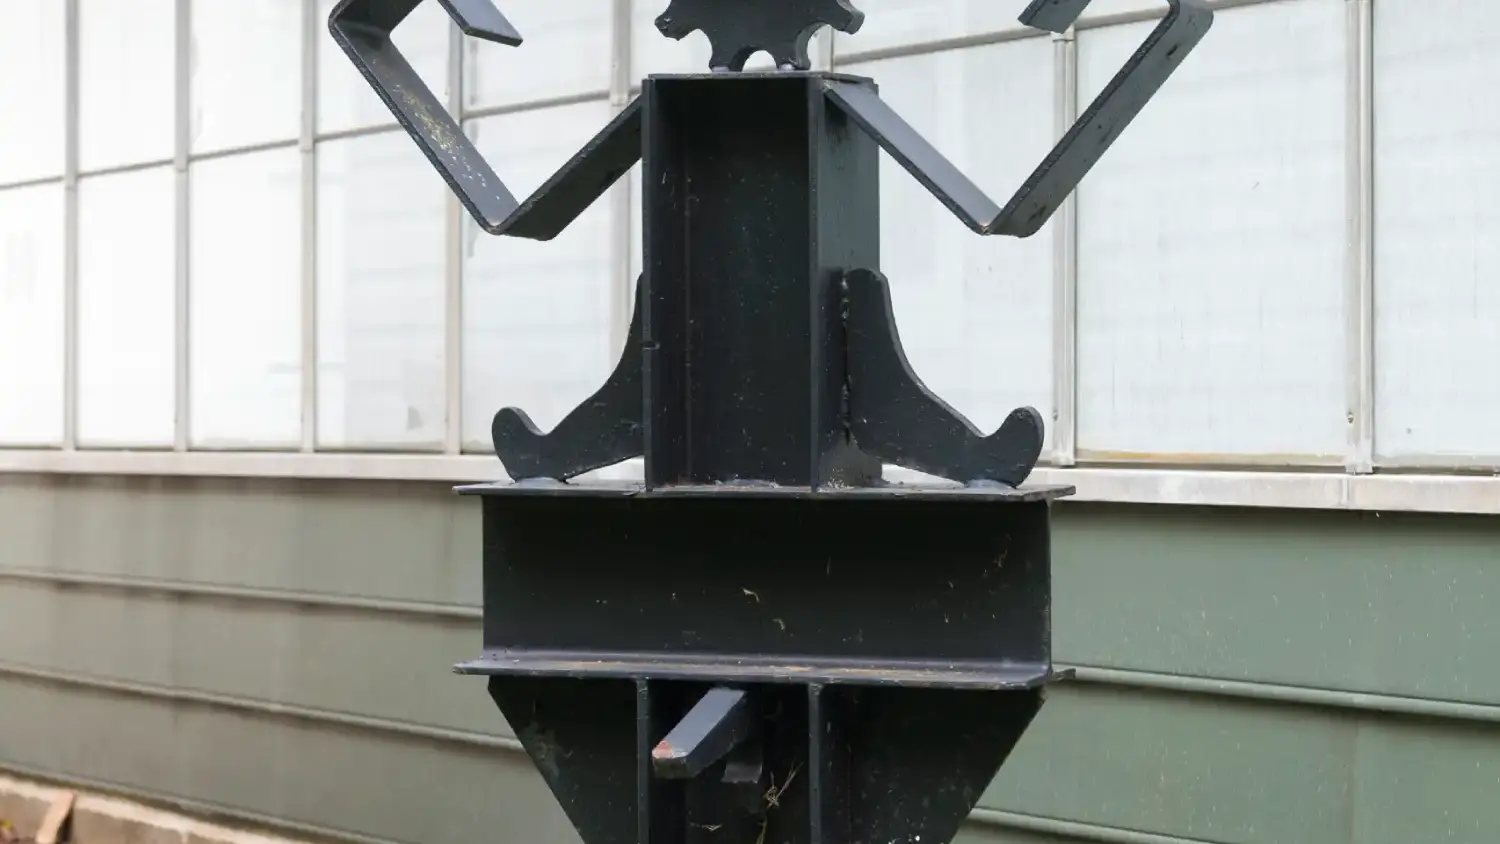 A metal sculptures that resembles a black steel robot with red eyeglasses